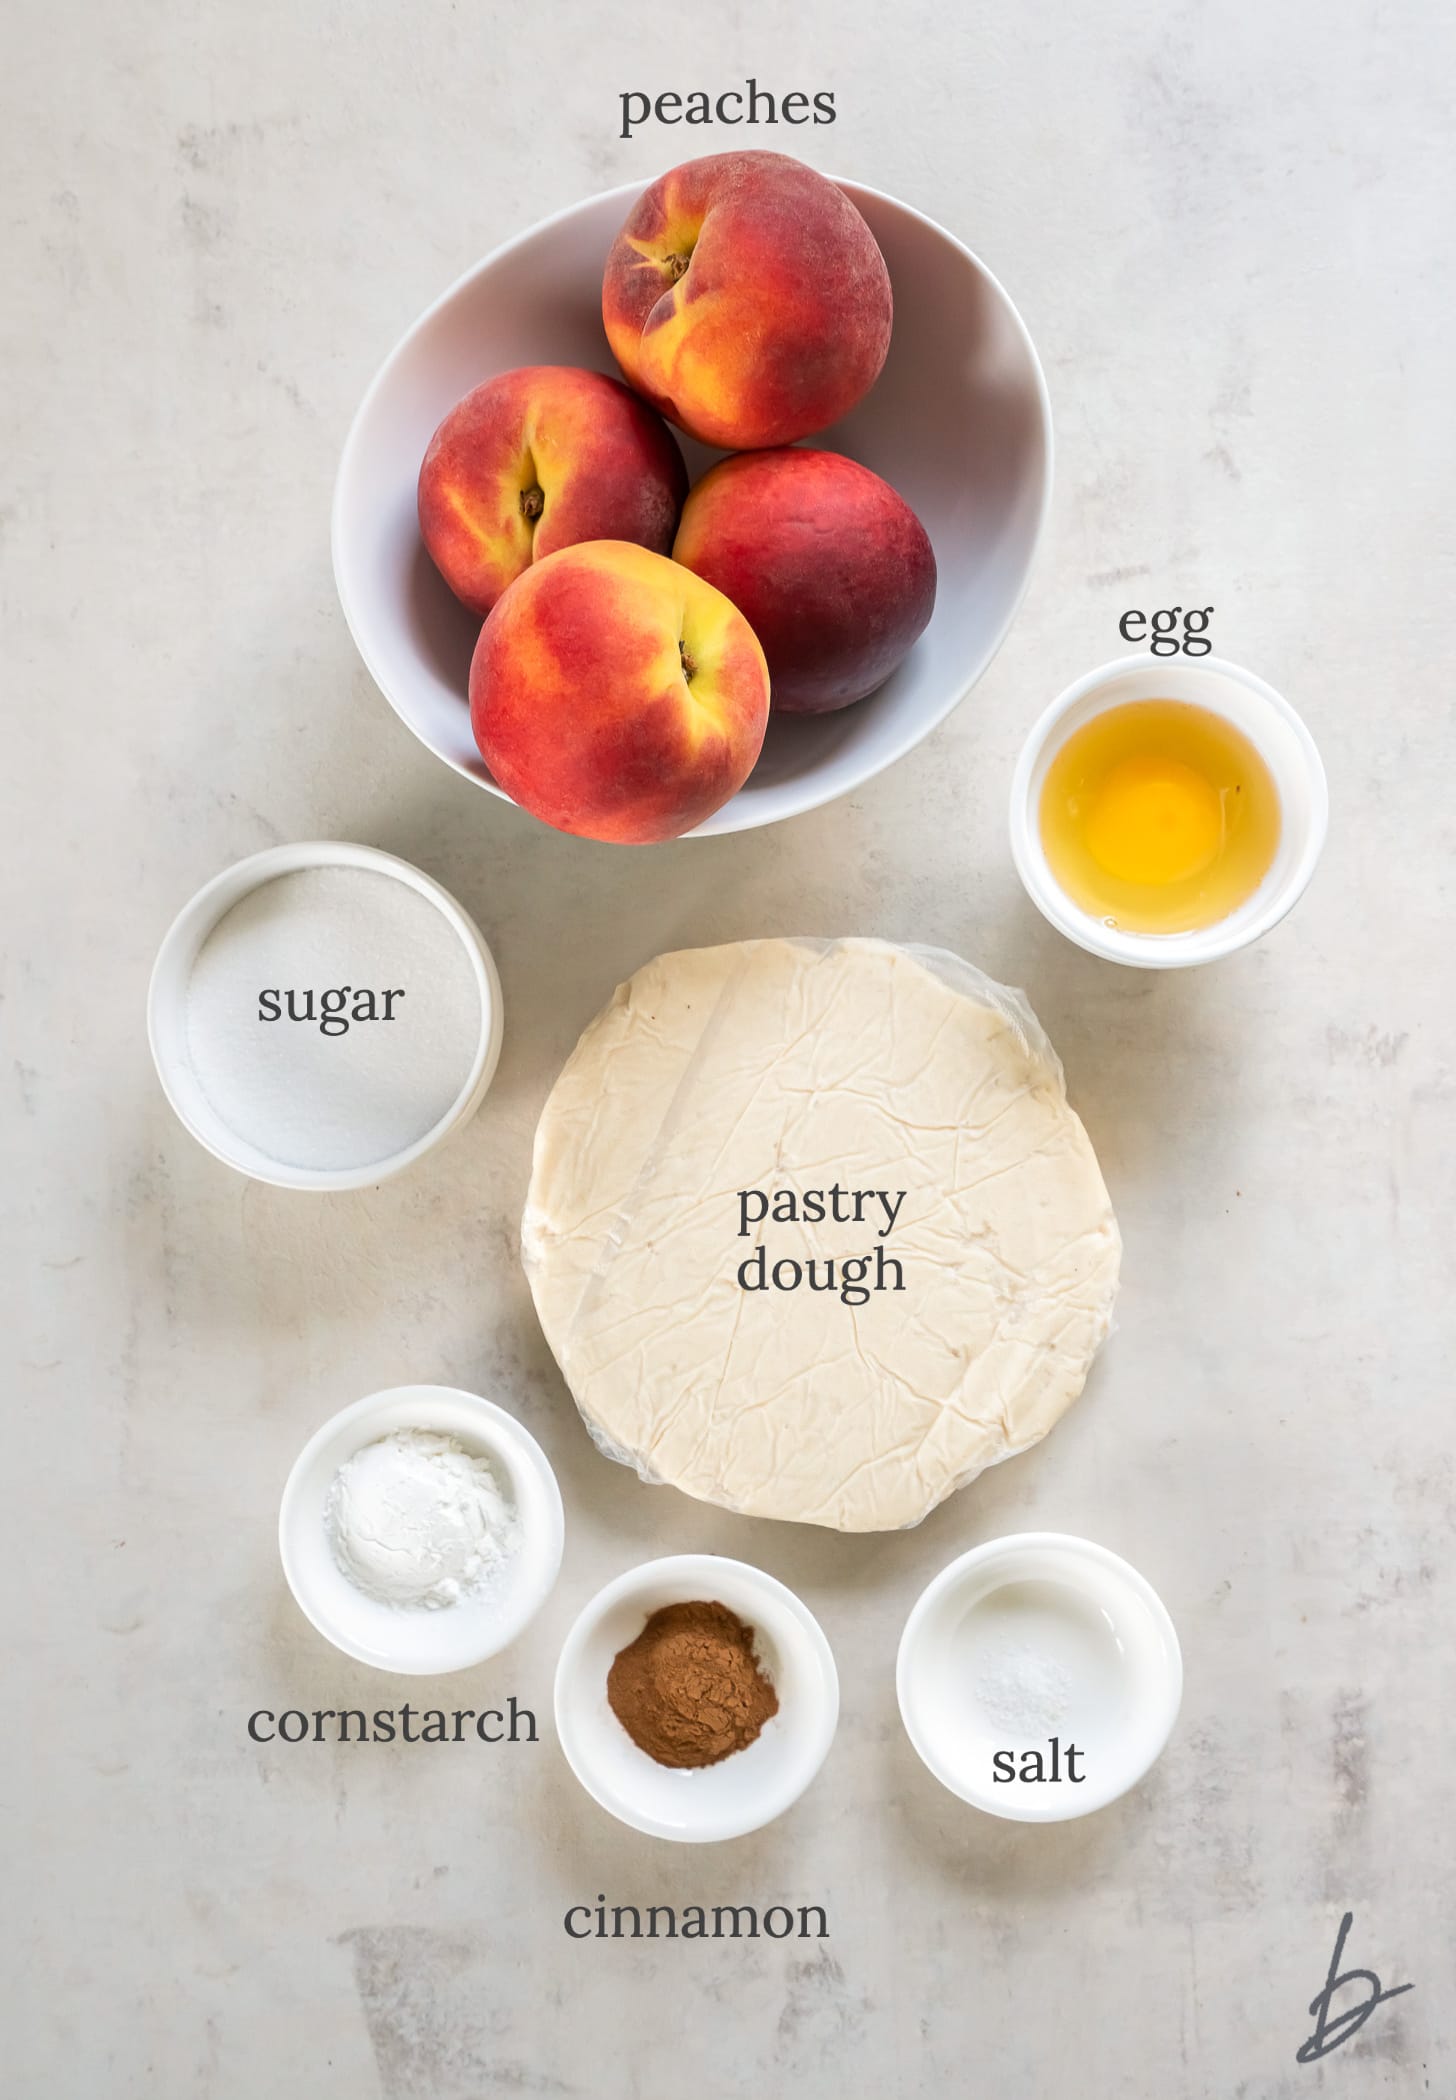 peach galette ingredients labeled with text